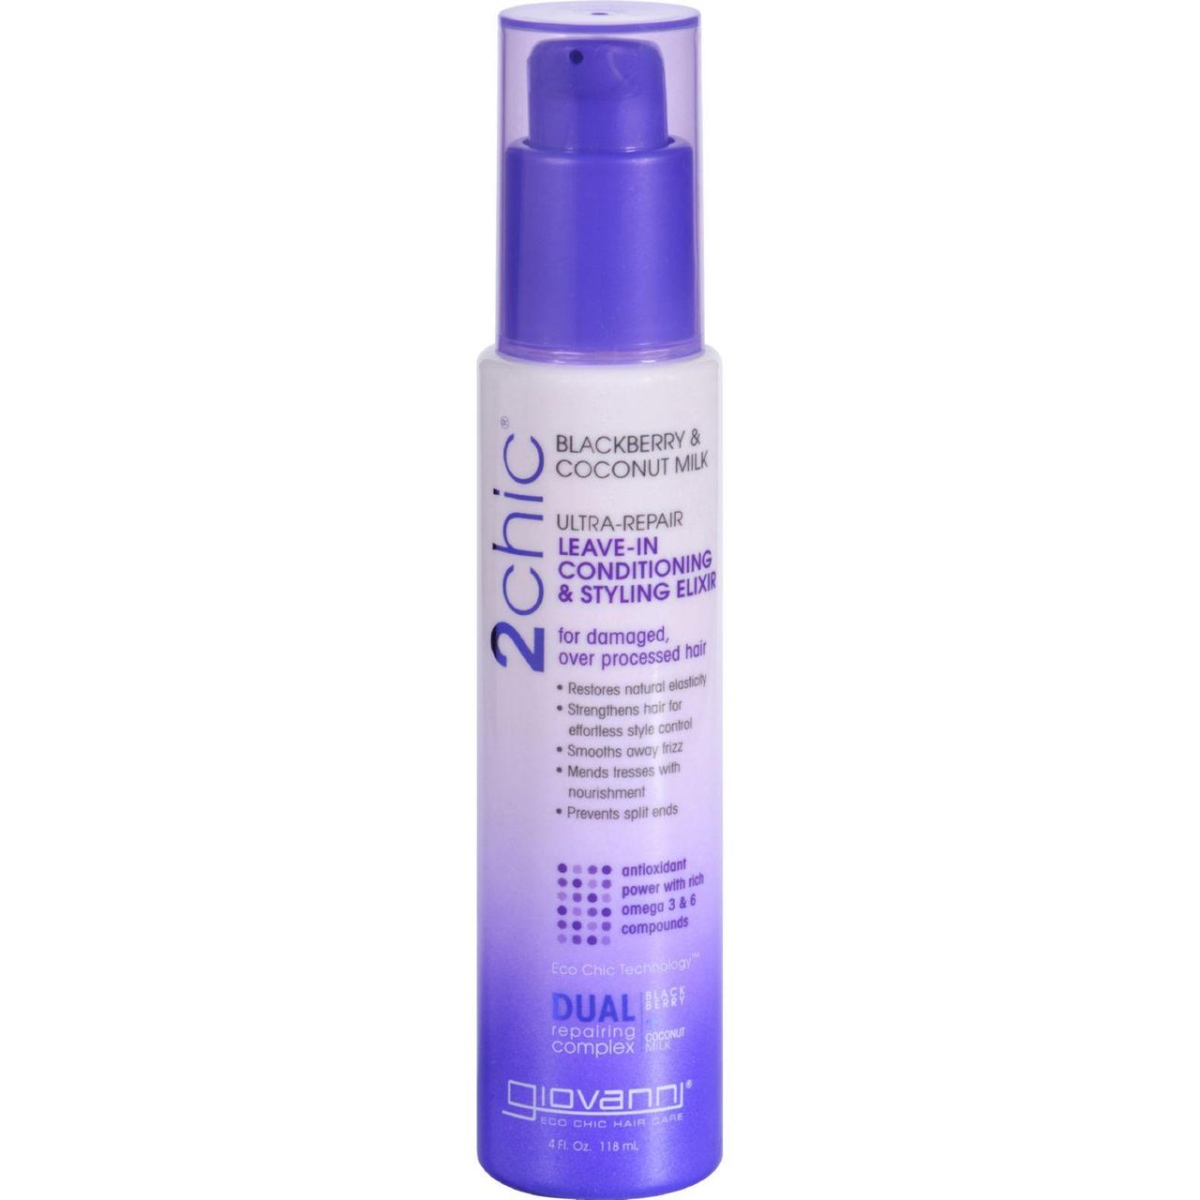 Hg1626746 4 Oz Leave-in Conditioning & Styling Elixir 2chic, Repairing - Blackberry & Coconut Milk